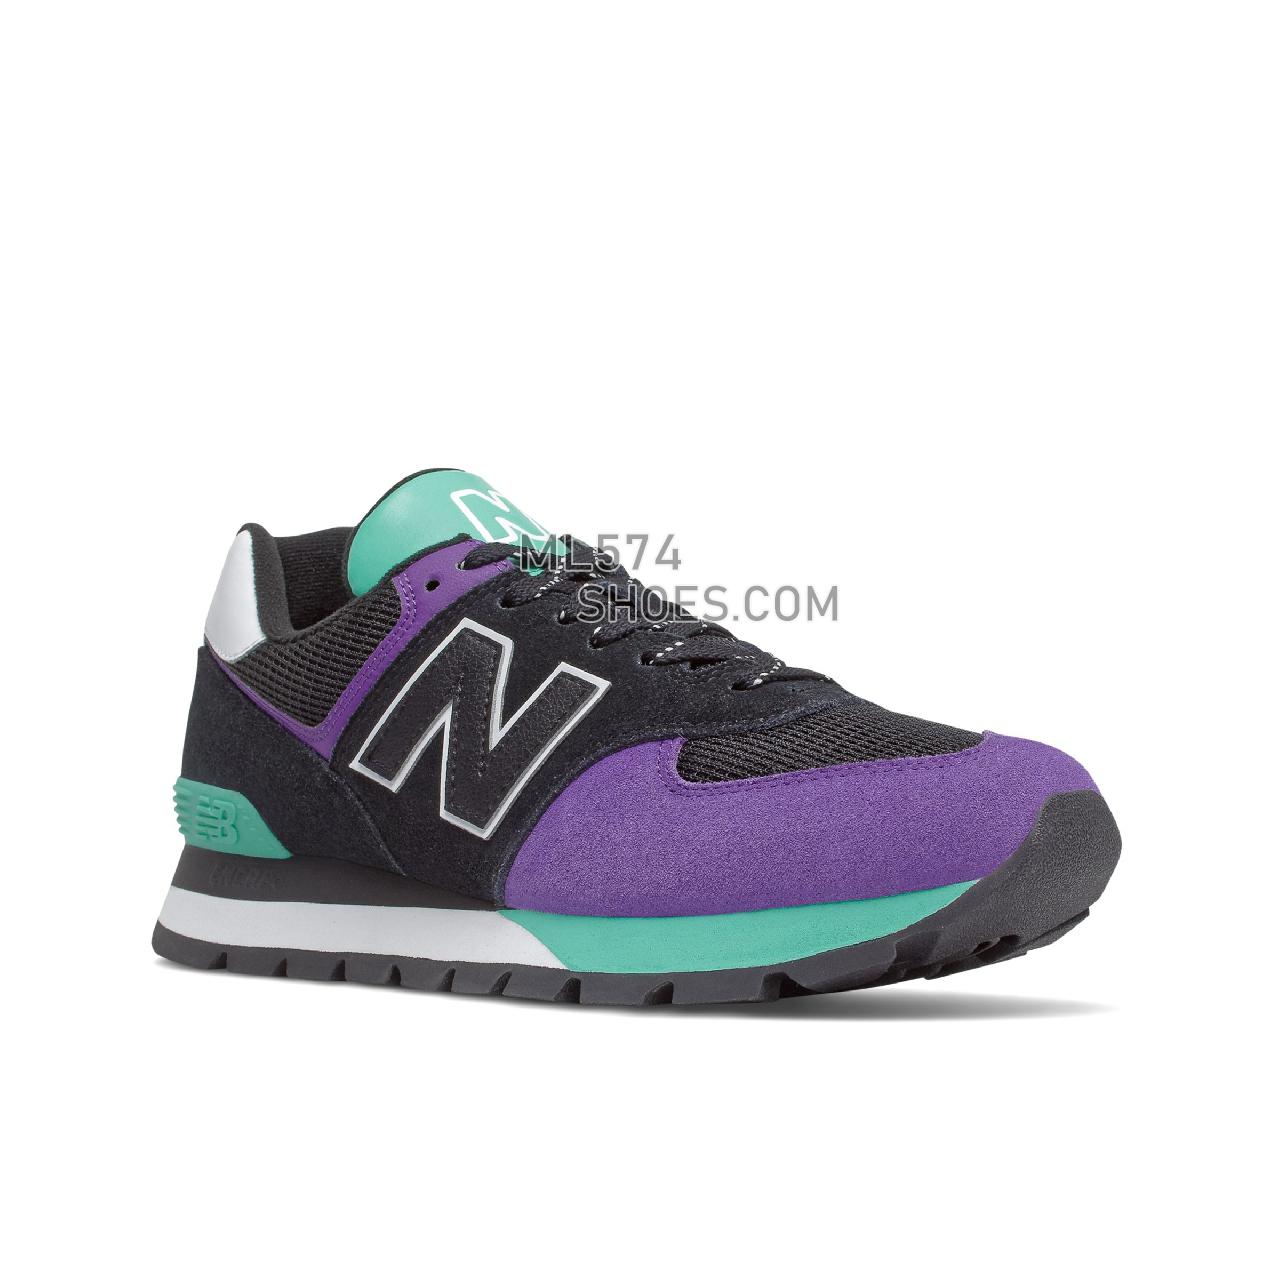 New Balance 574 Rugged - Men's All Terrain - Black with Prism Purple - ML574DNT